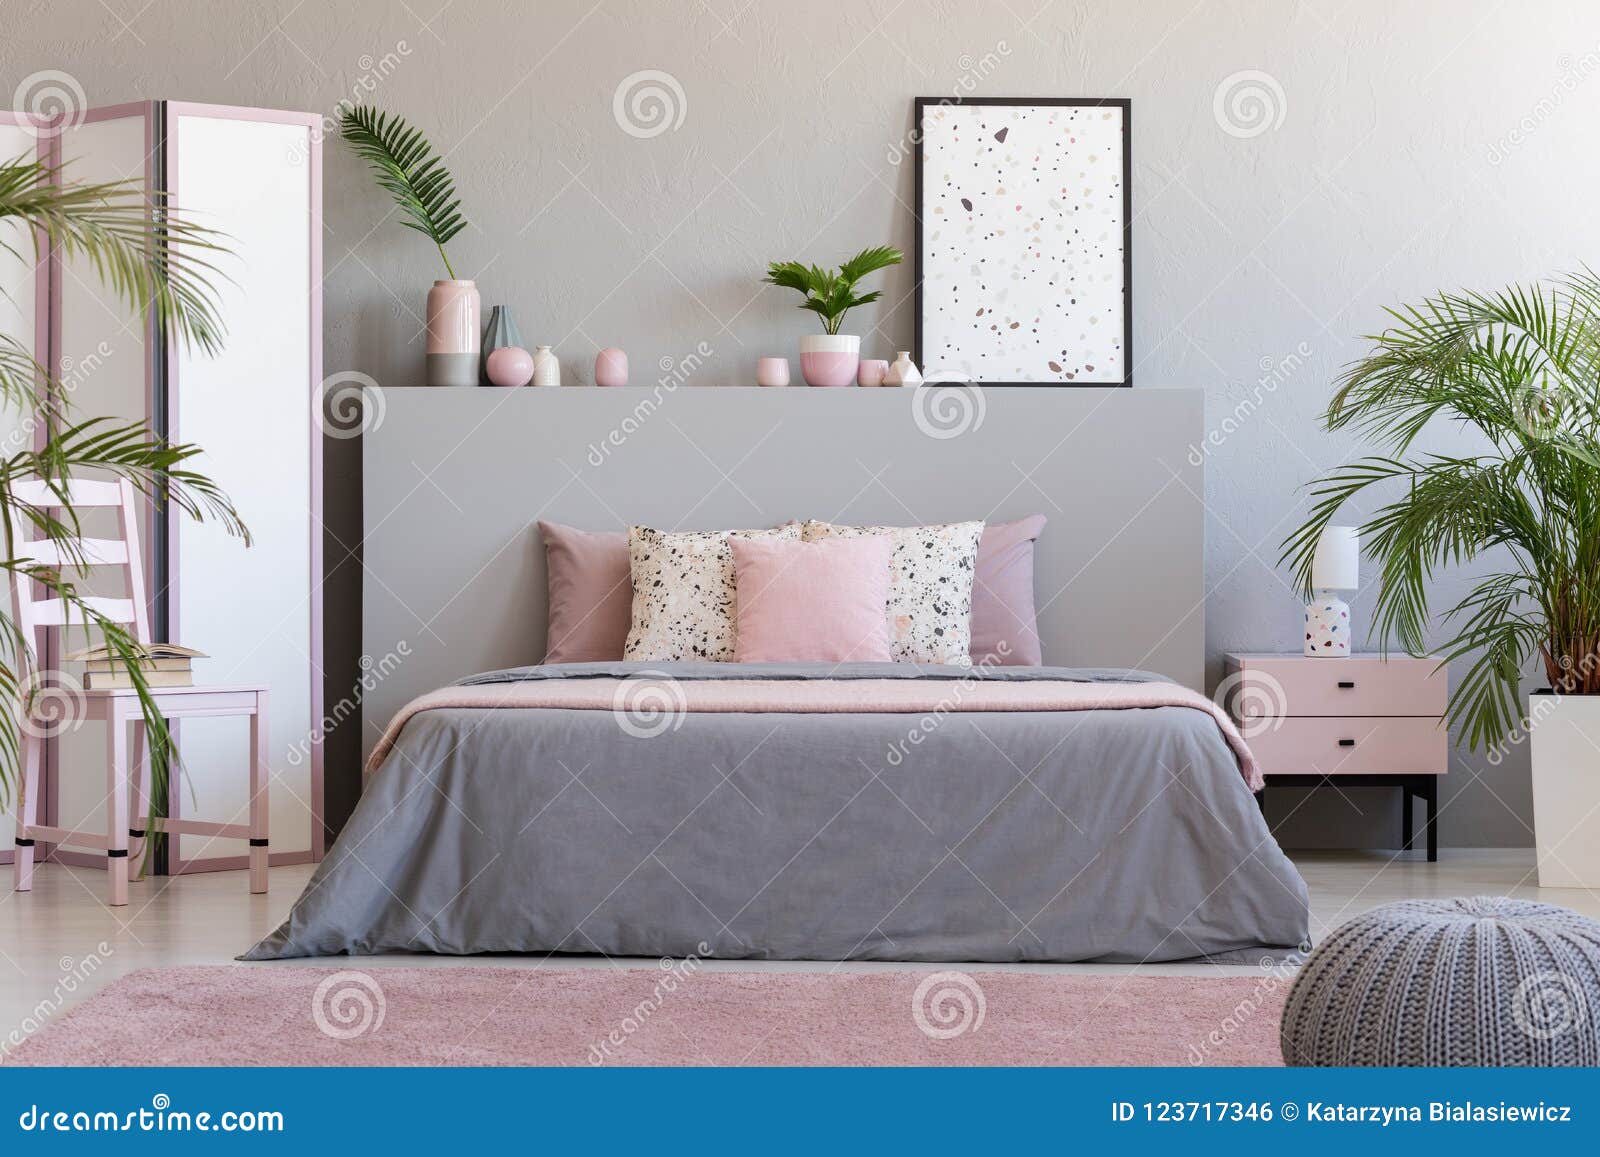 poster on grey bedhead in bedroom interior with pink pillows on